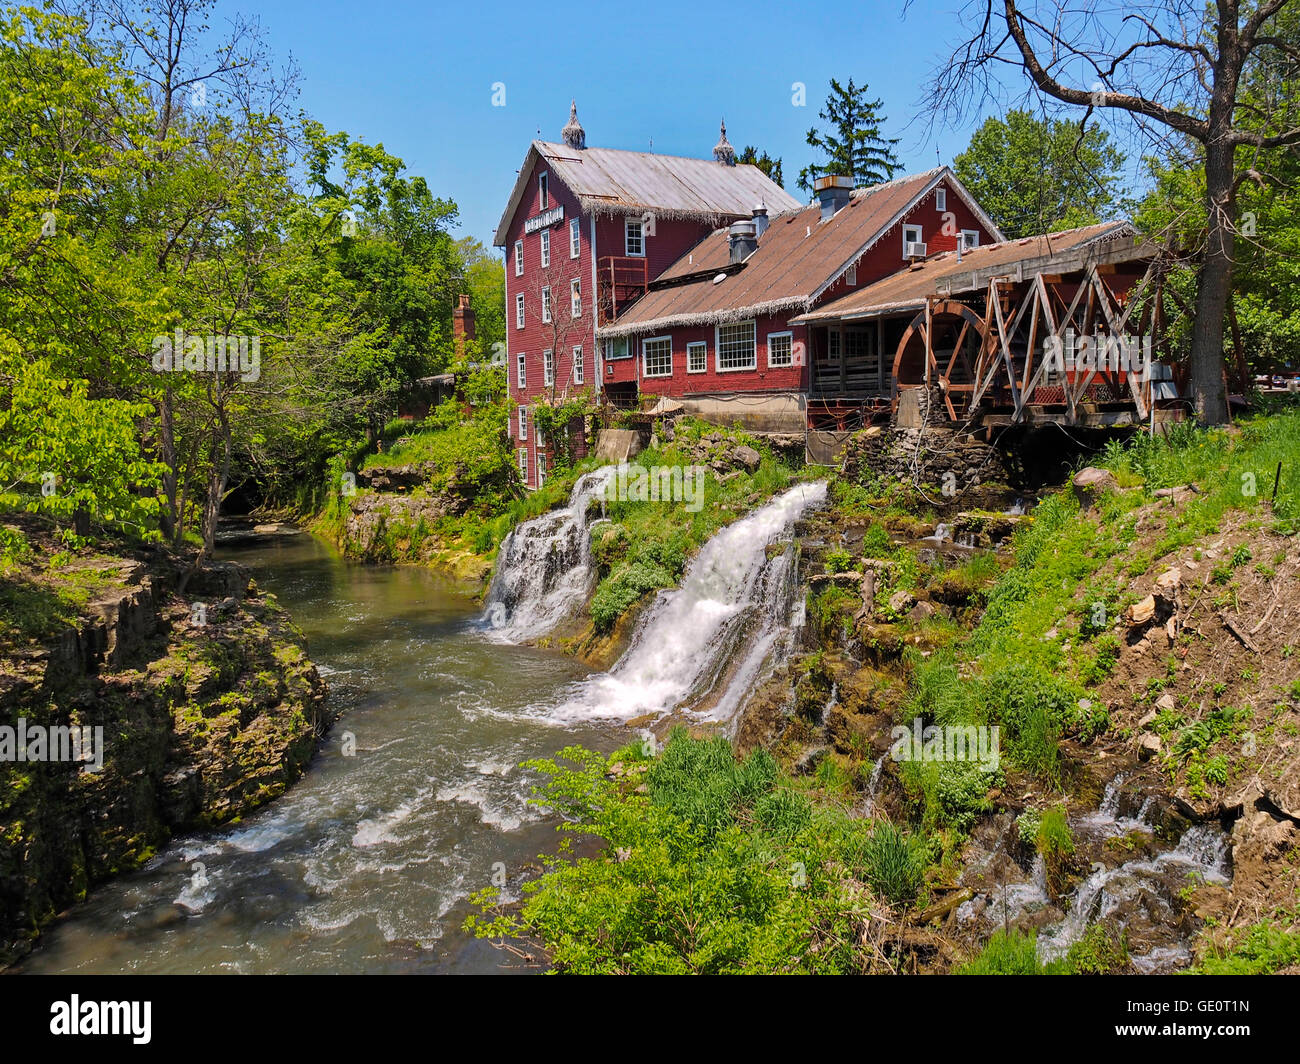 Clifton Mill in Clifton Ohio USA on the banks of the River 'The Little Miami' Stock Photo